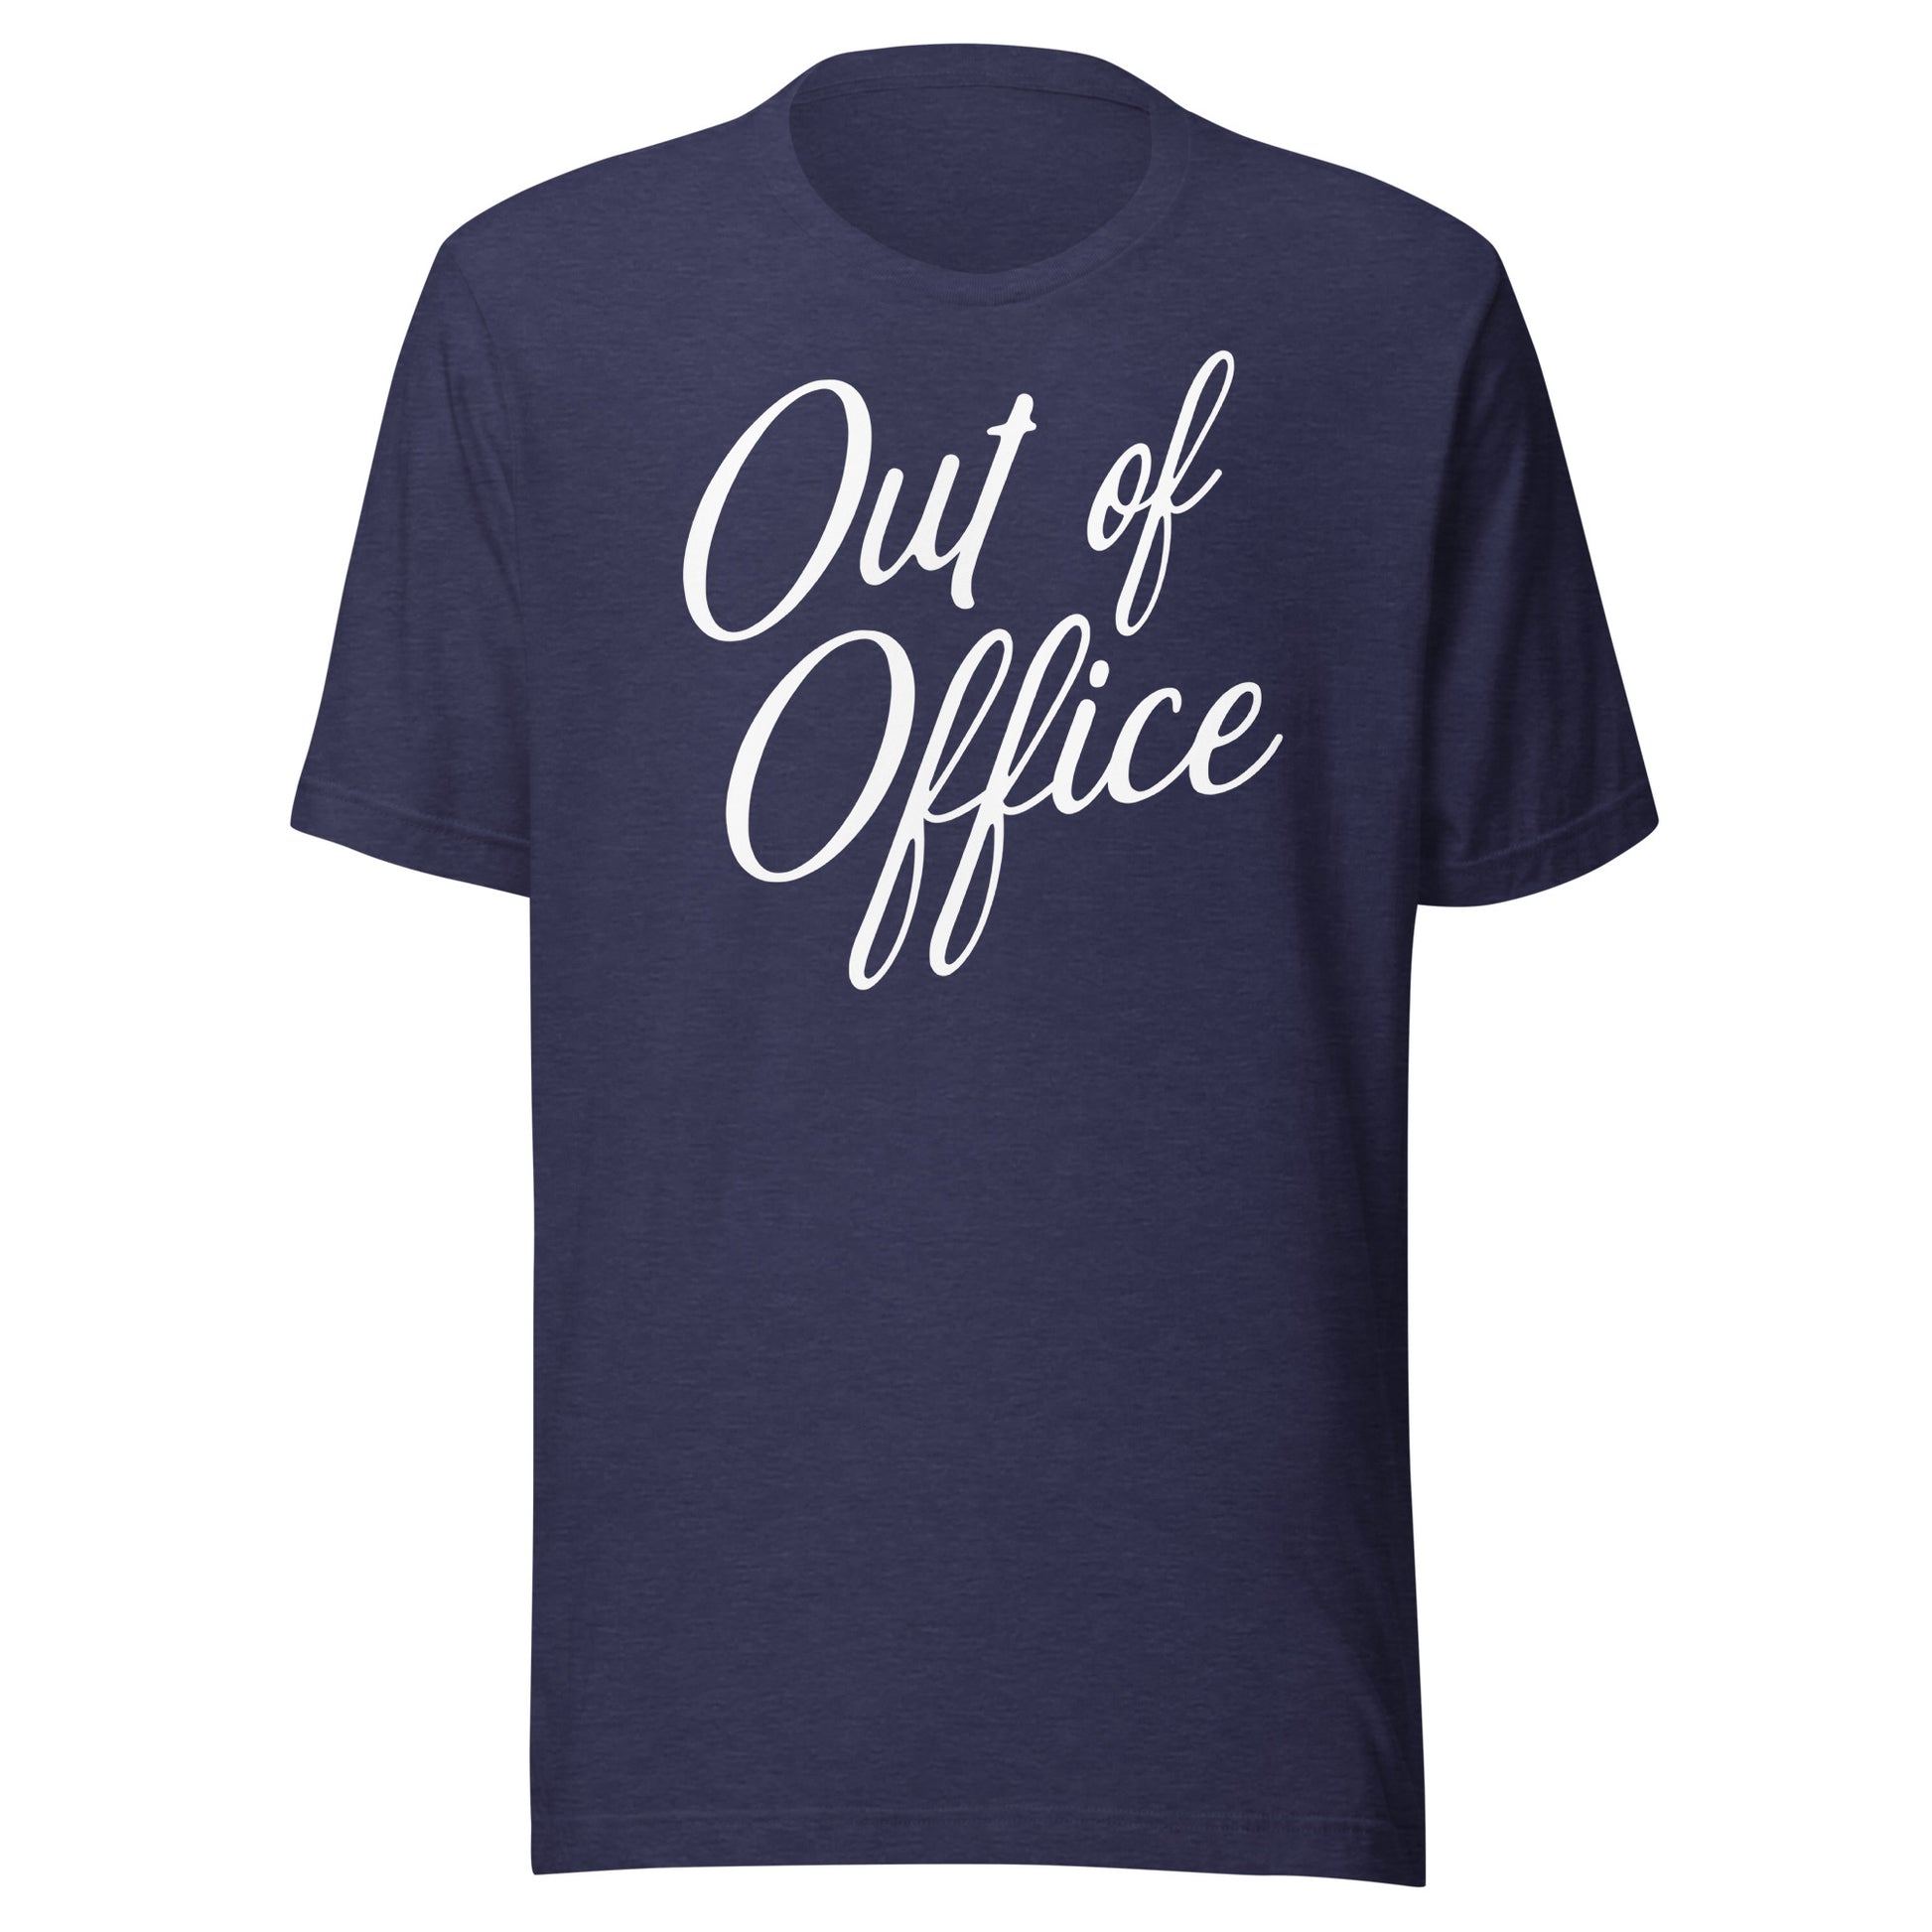 Out of Office T-Shirt for your next trip or getaway